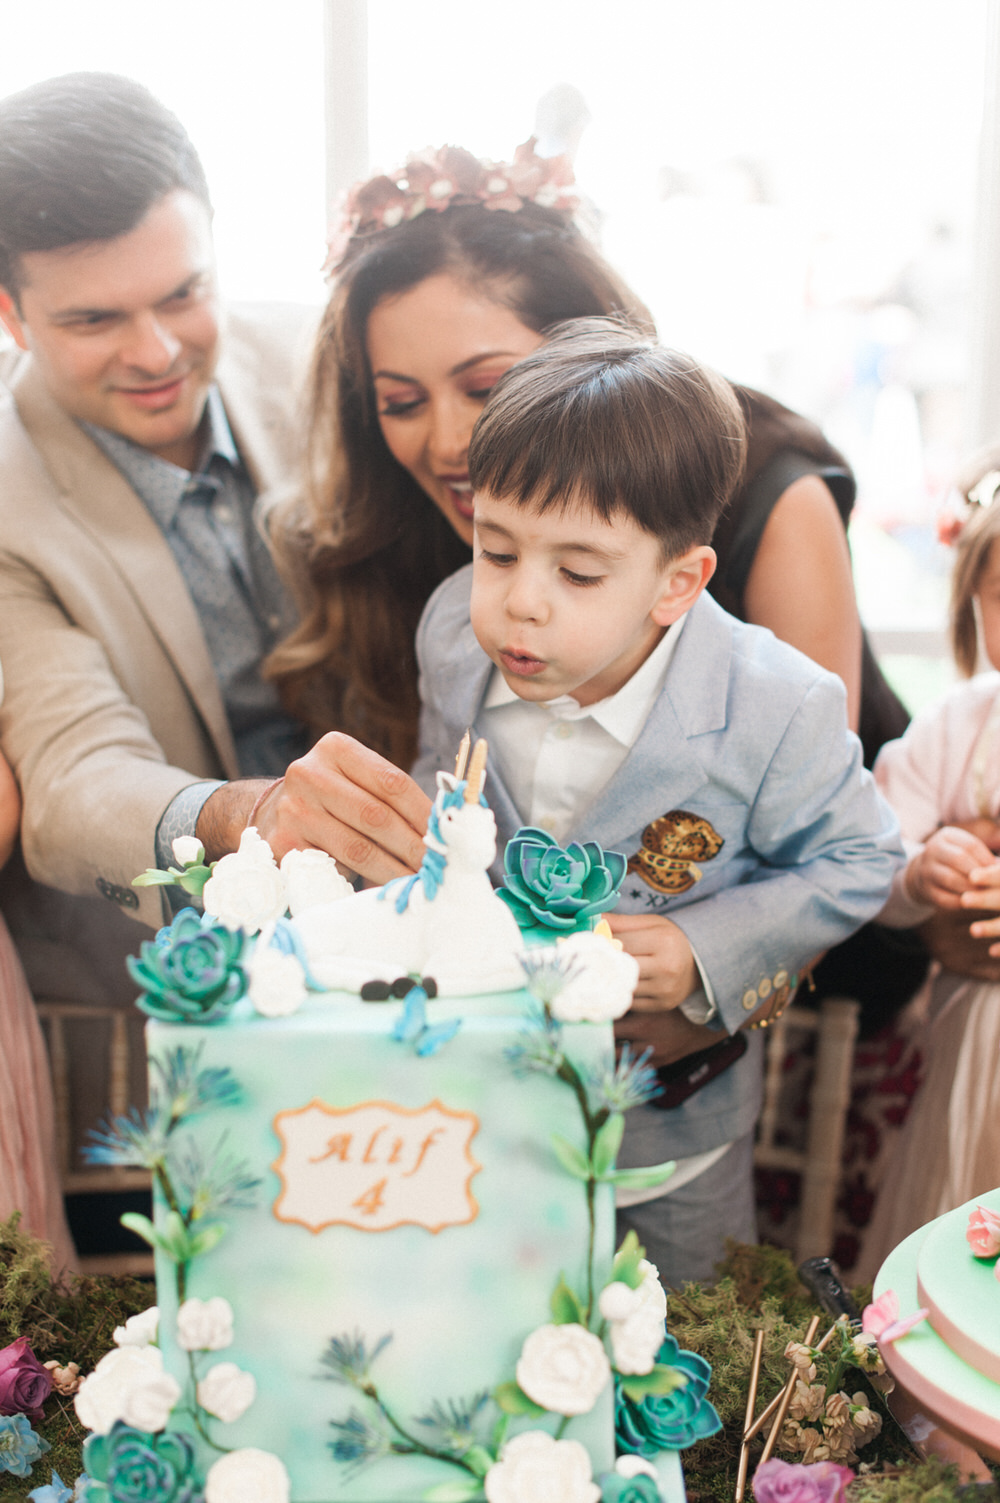 A Midsummer nights dream inspired children's birthday party with stunning floral, fairy entertainment, crafts and a picnic. Photos by Kate Nielen.